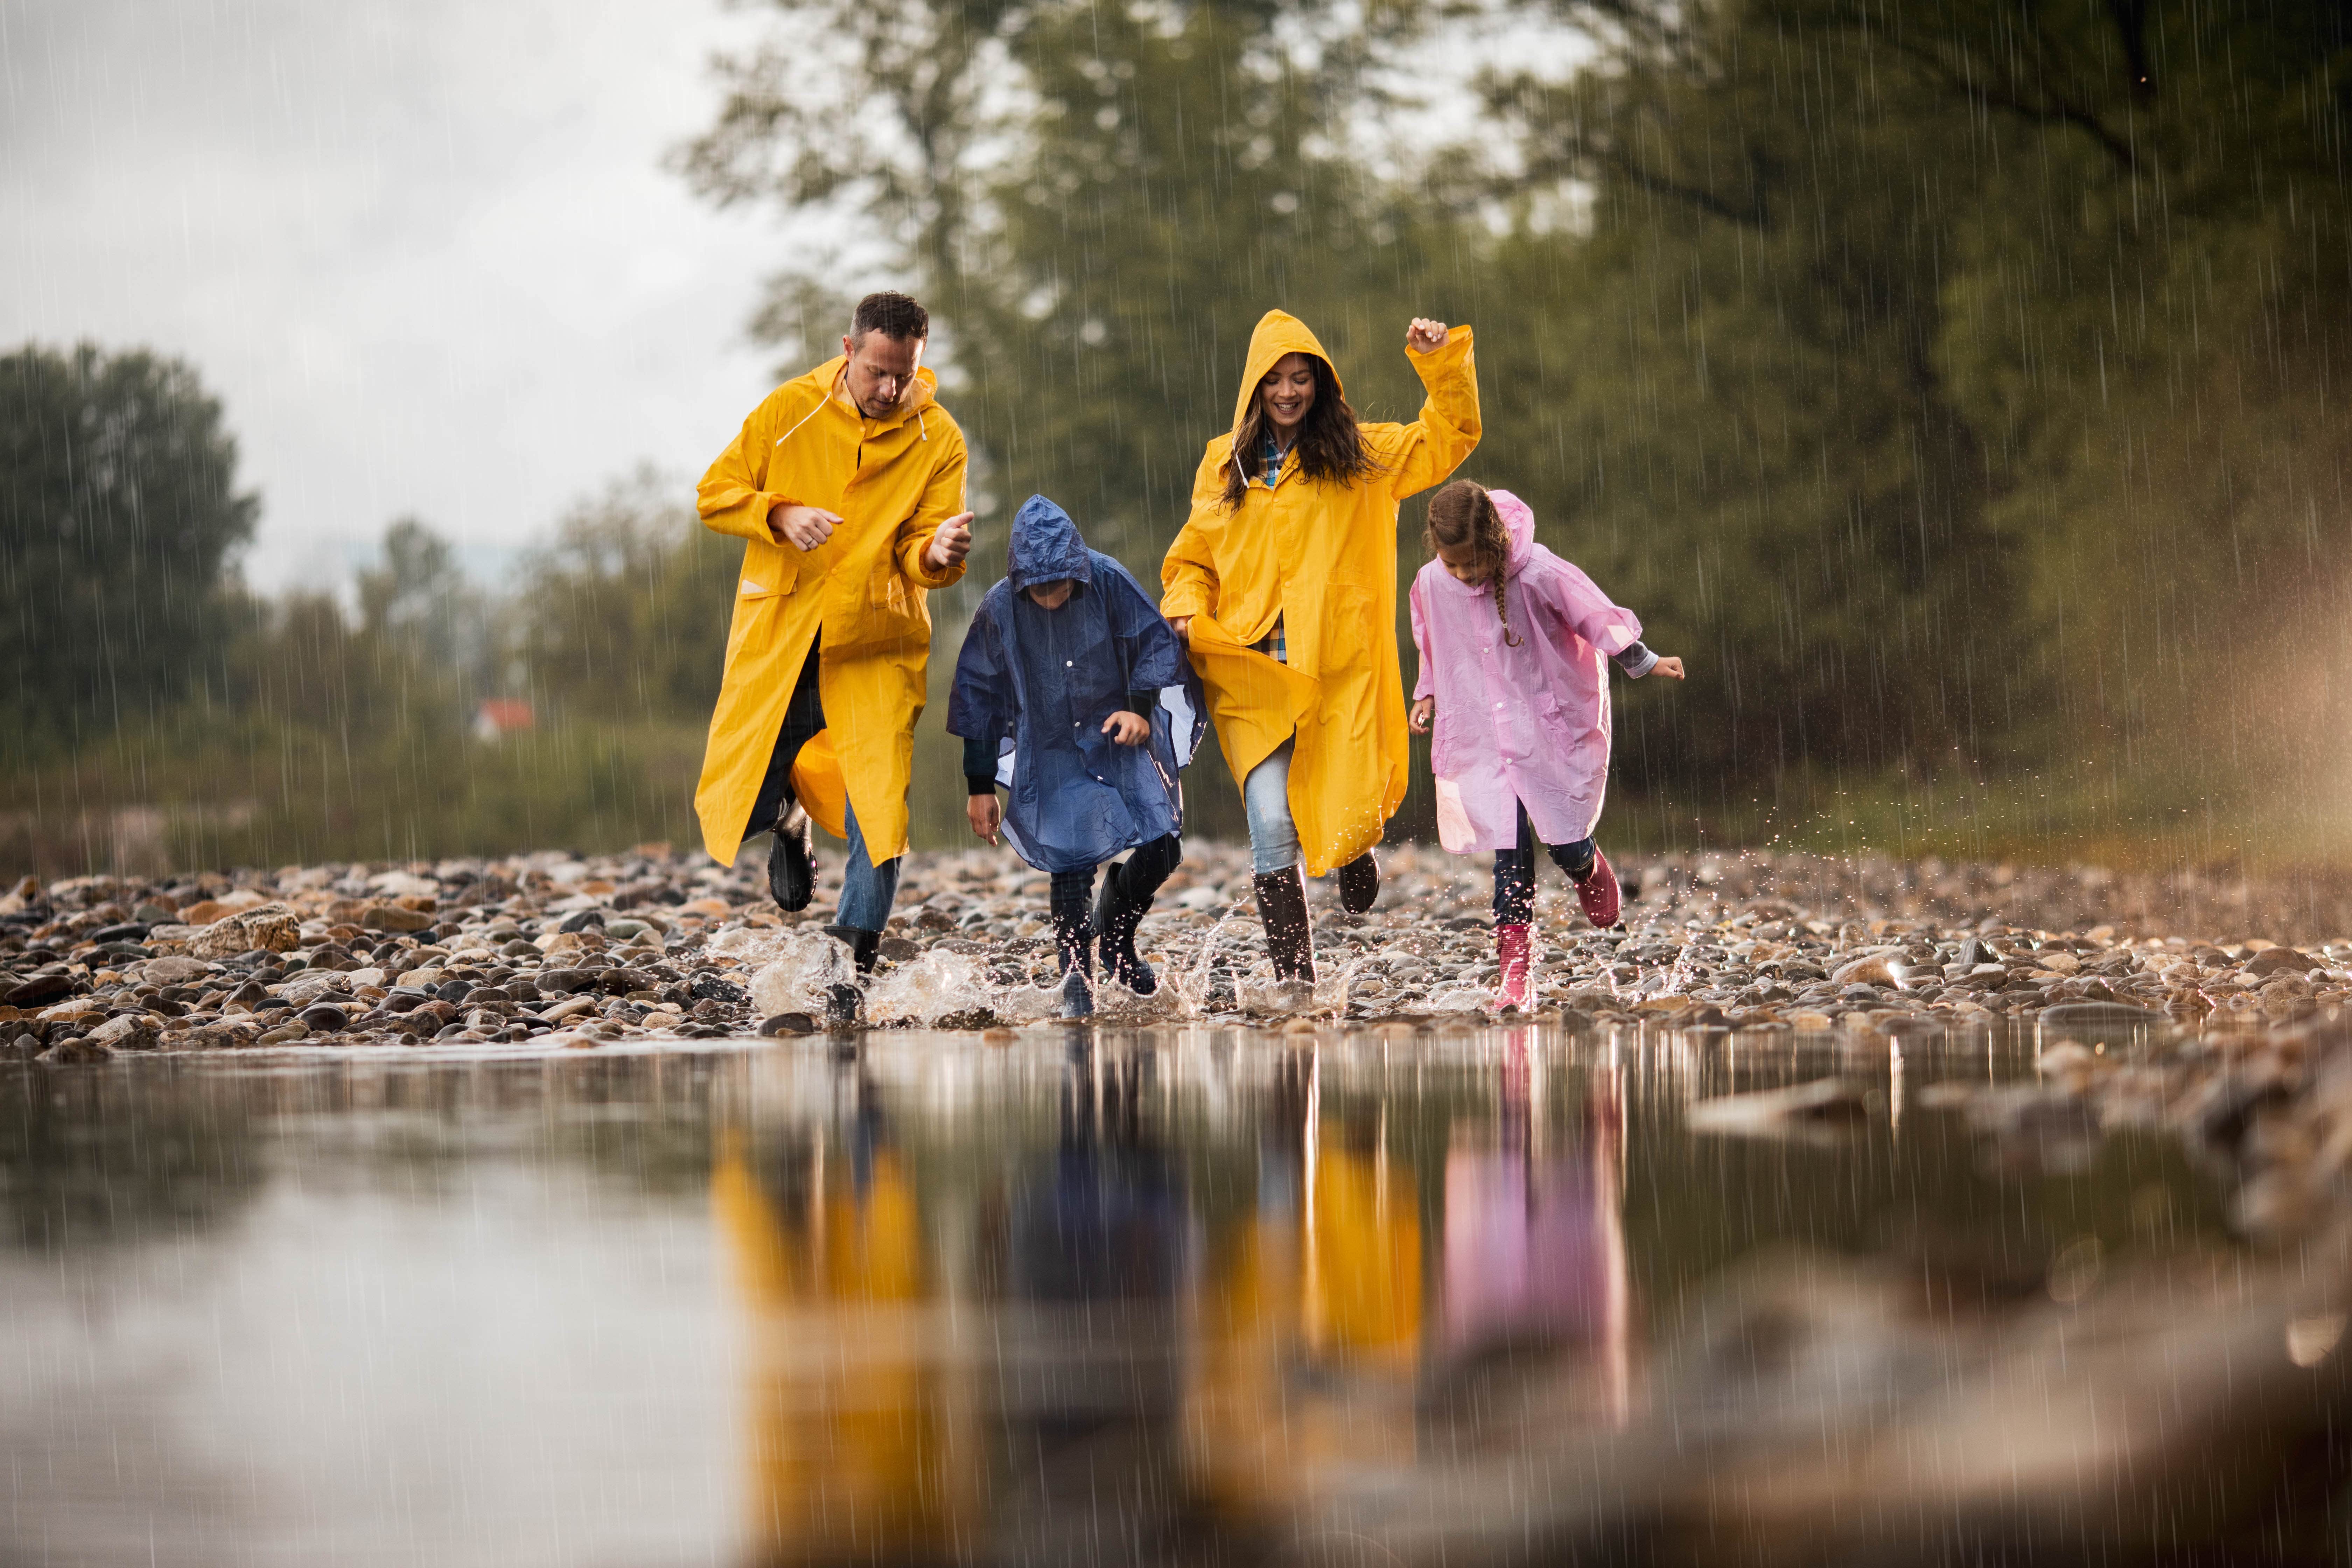 Family in rain boots and rain jackets dancing next to a large puddle